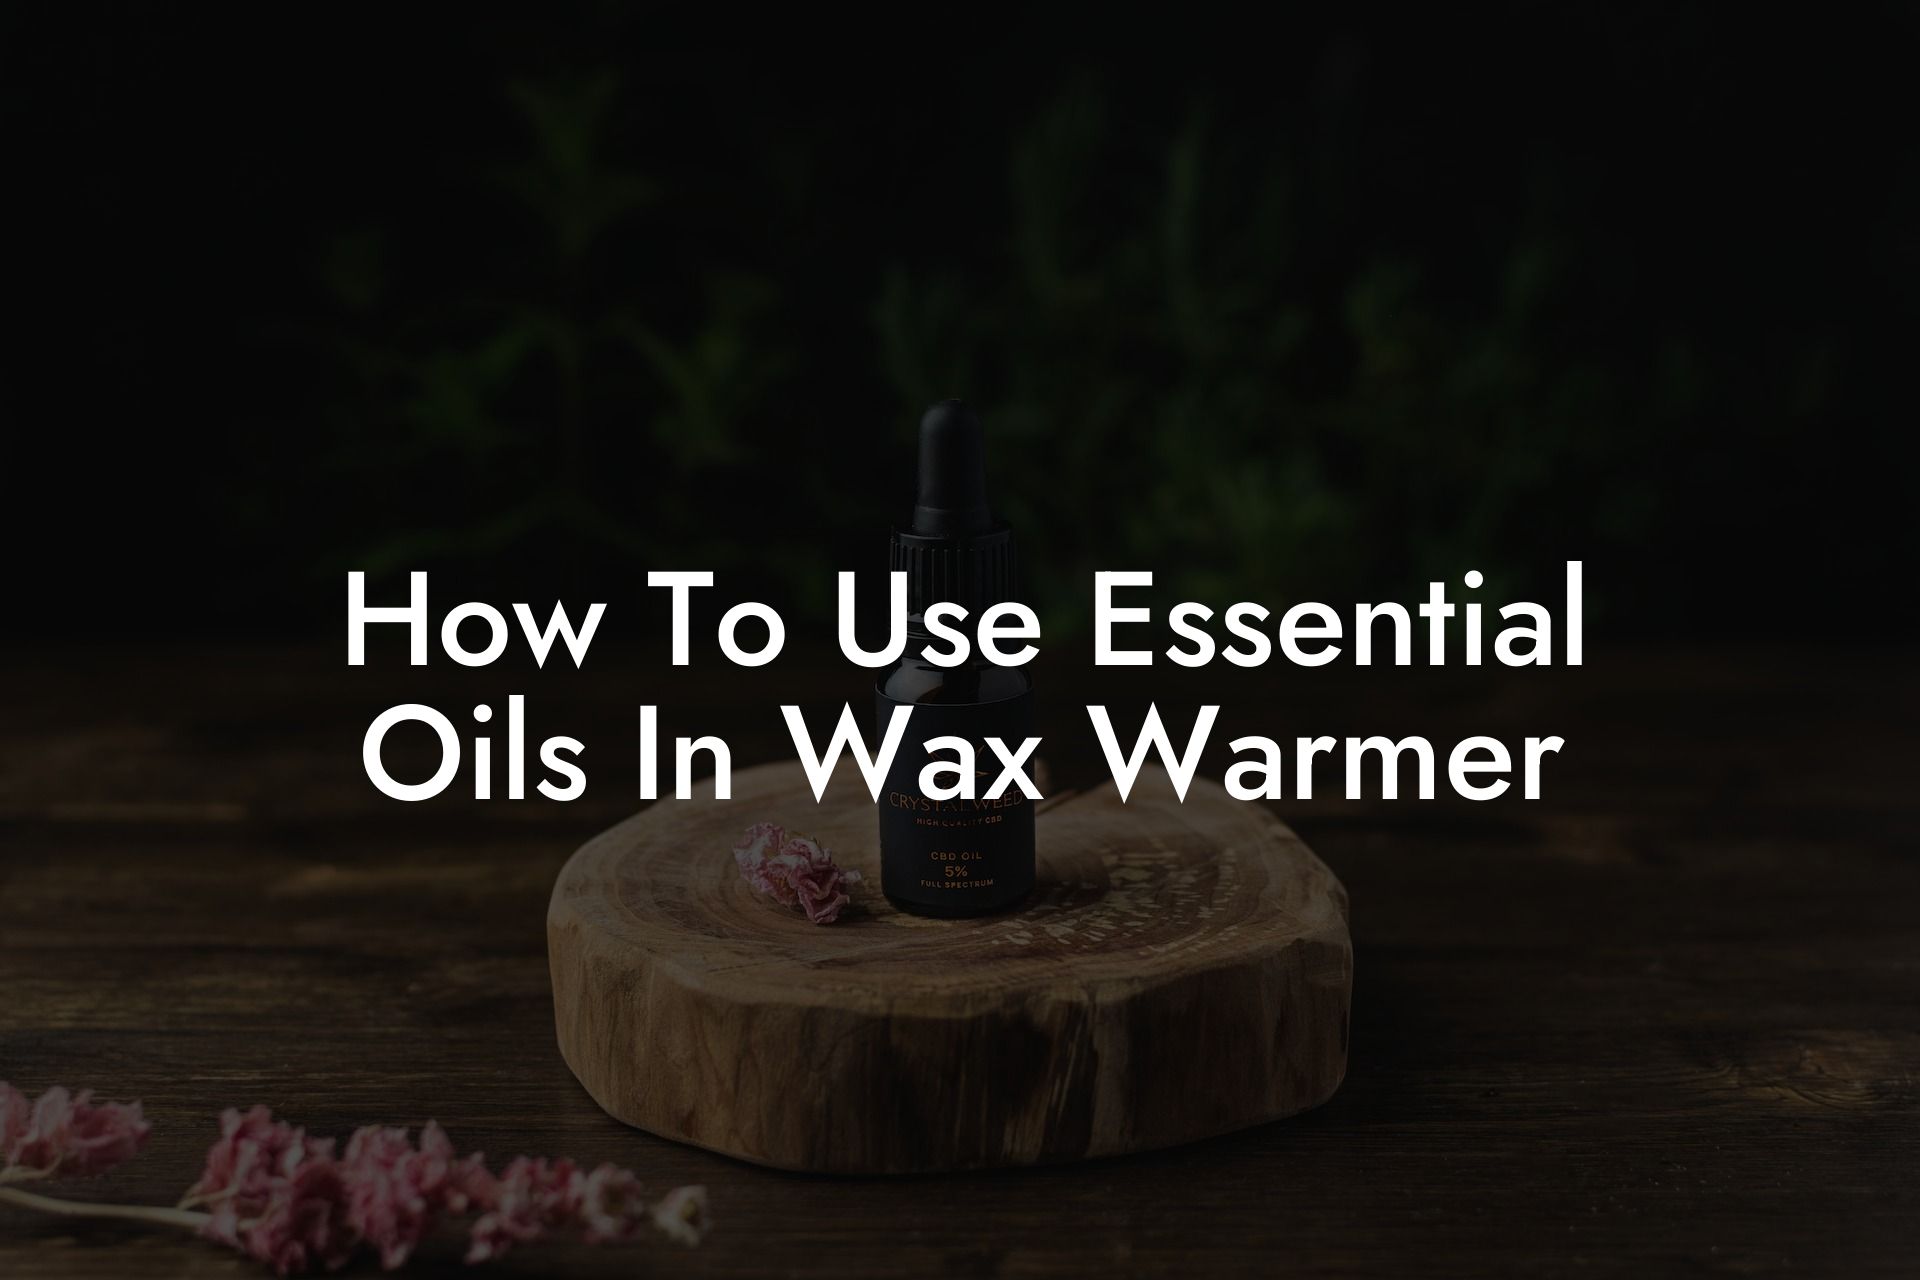 How To Use Essential Oils In Wax Warmer